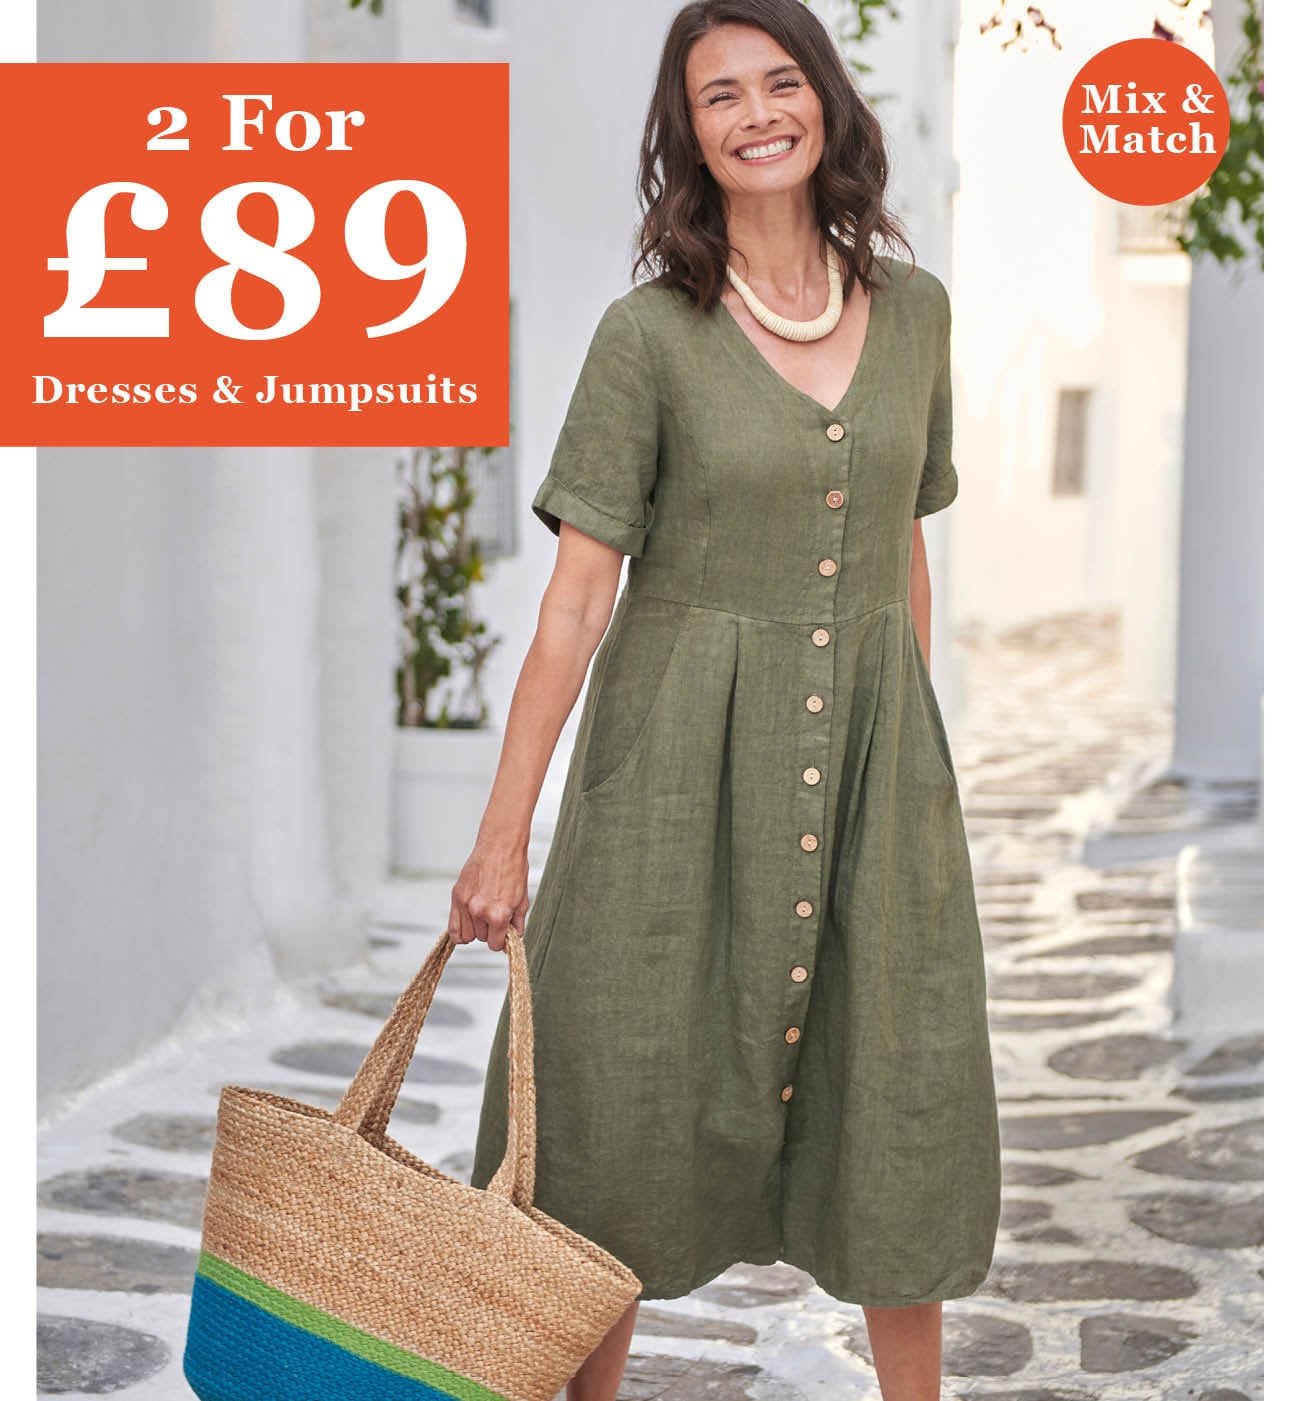 woolovers uk: 2 For 89 Dresses & Jumpsuits Ends Soon... | Milled